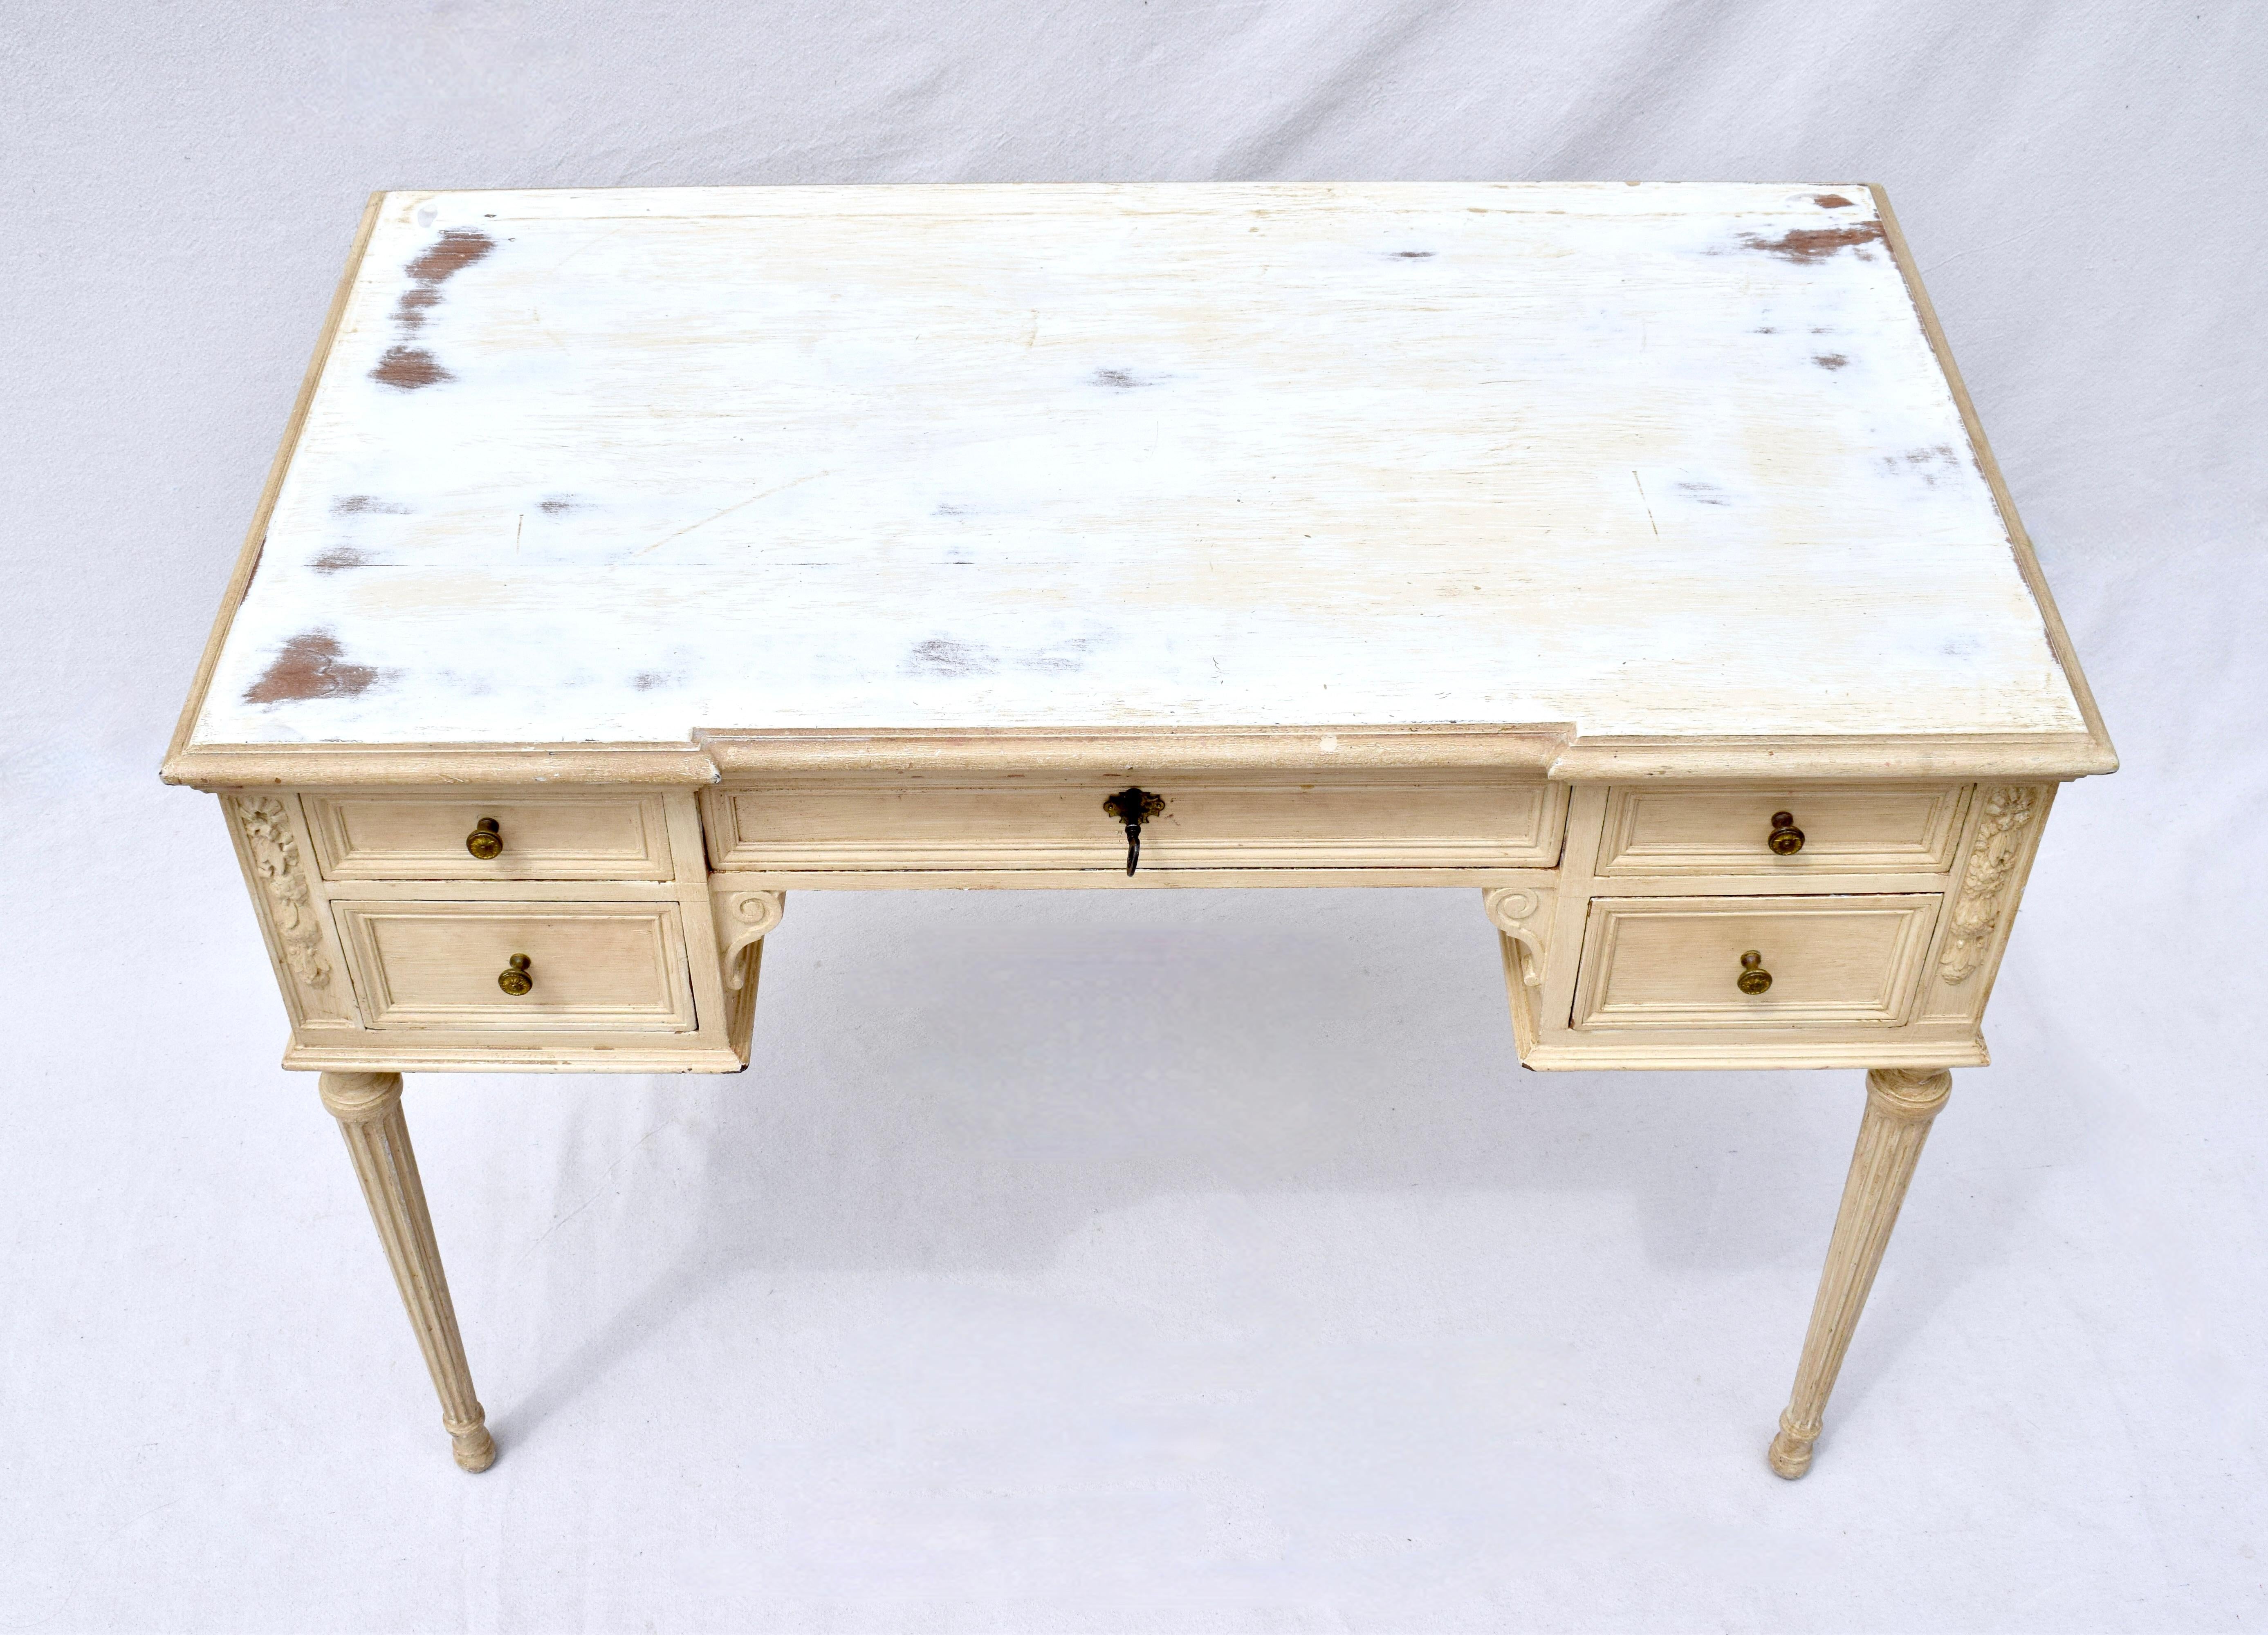 Early 20th century painted desk Louis XVI style with a center drawer including working lock & key and two drawers on each side. This very solid Mahogany desk features nicely carved embellishments throughout and is of heirloom quality.